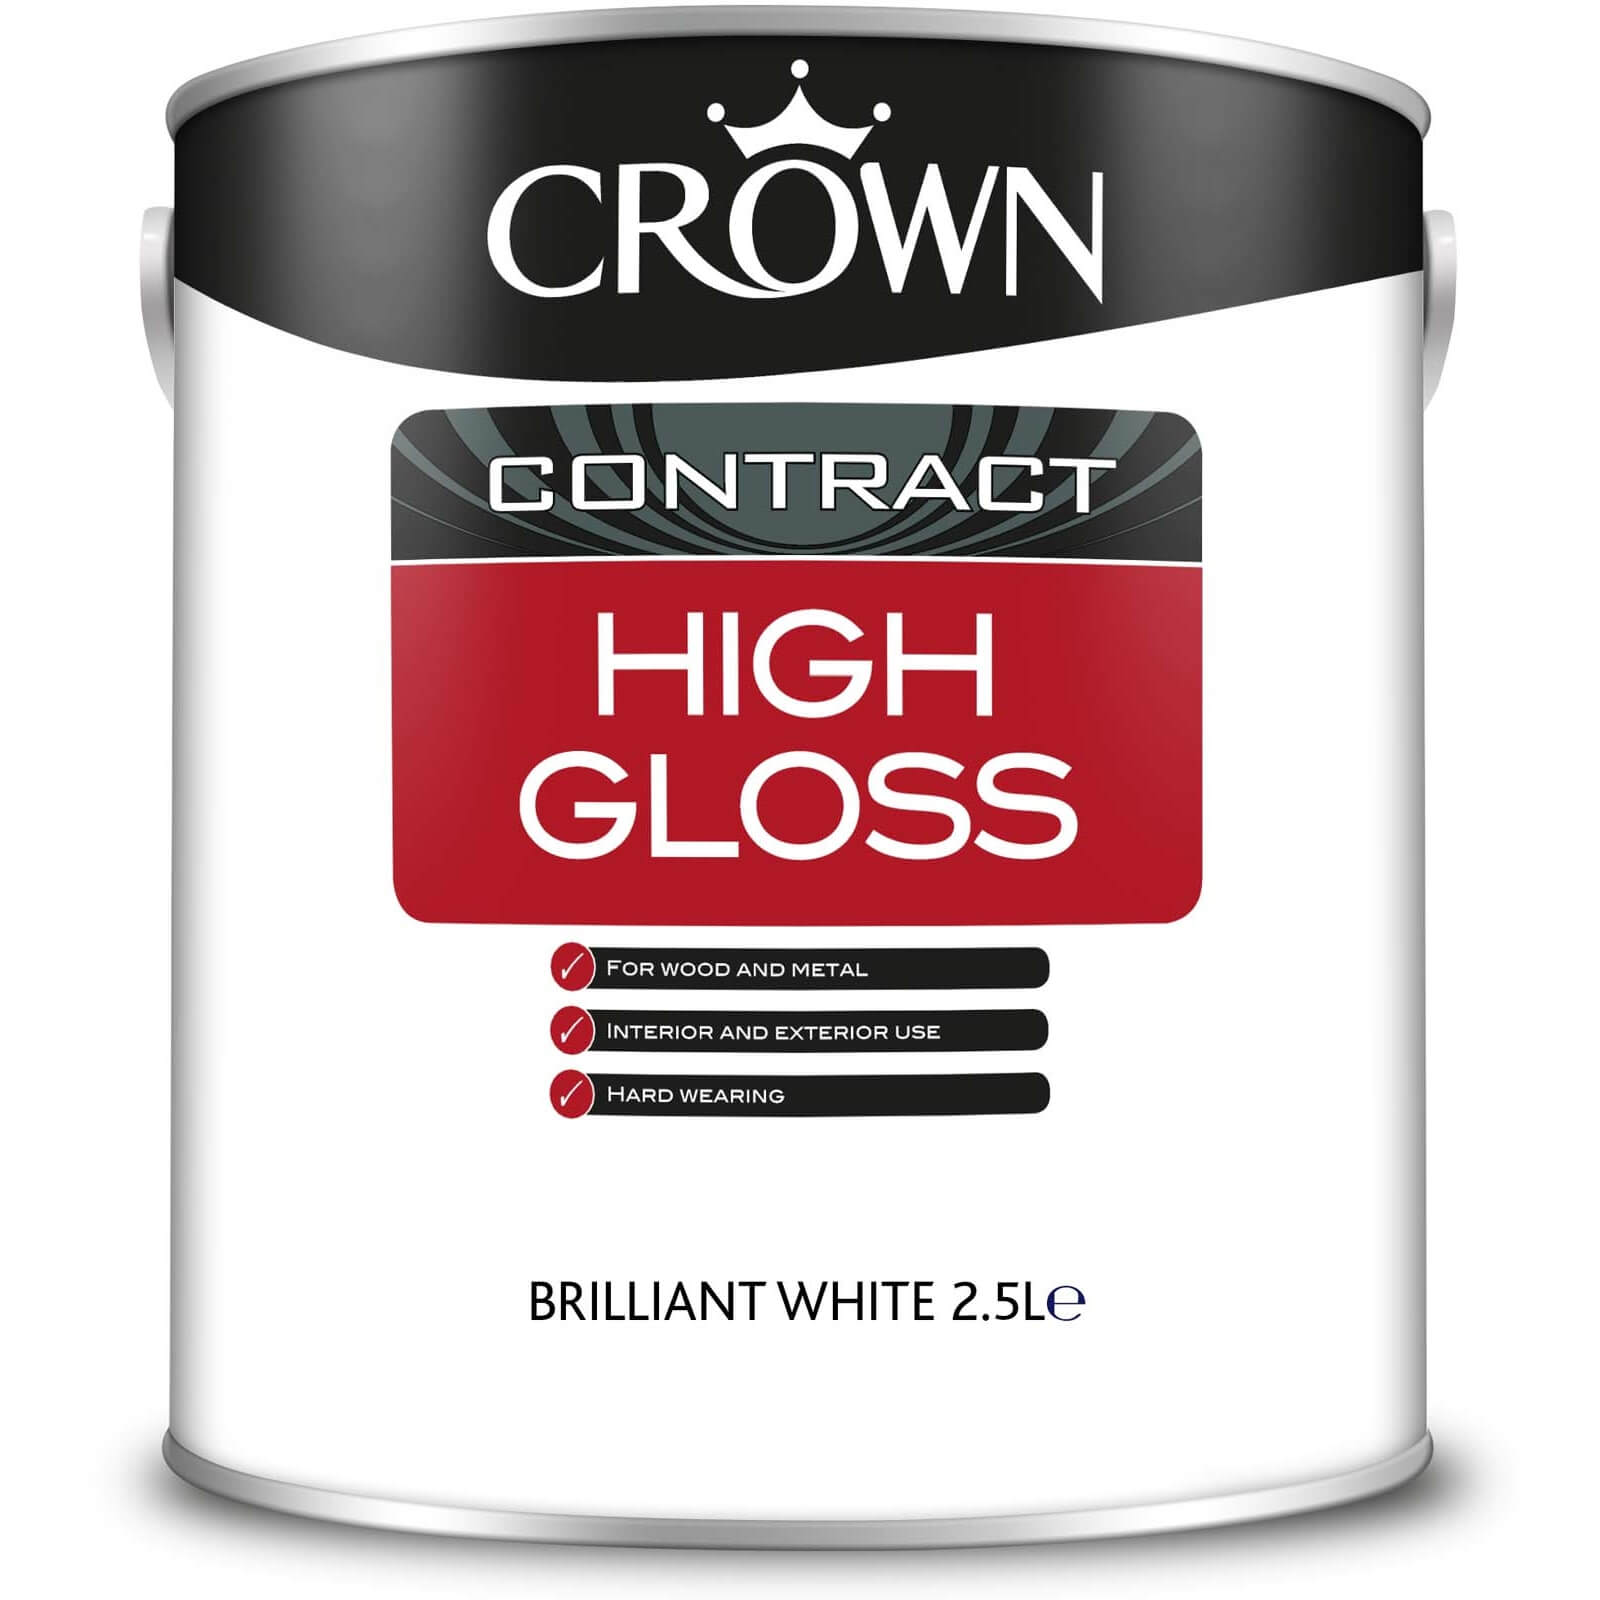 Crown Contract High Gloss Brilliant White Paint - 2.5L